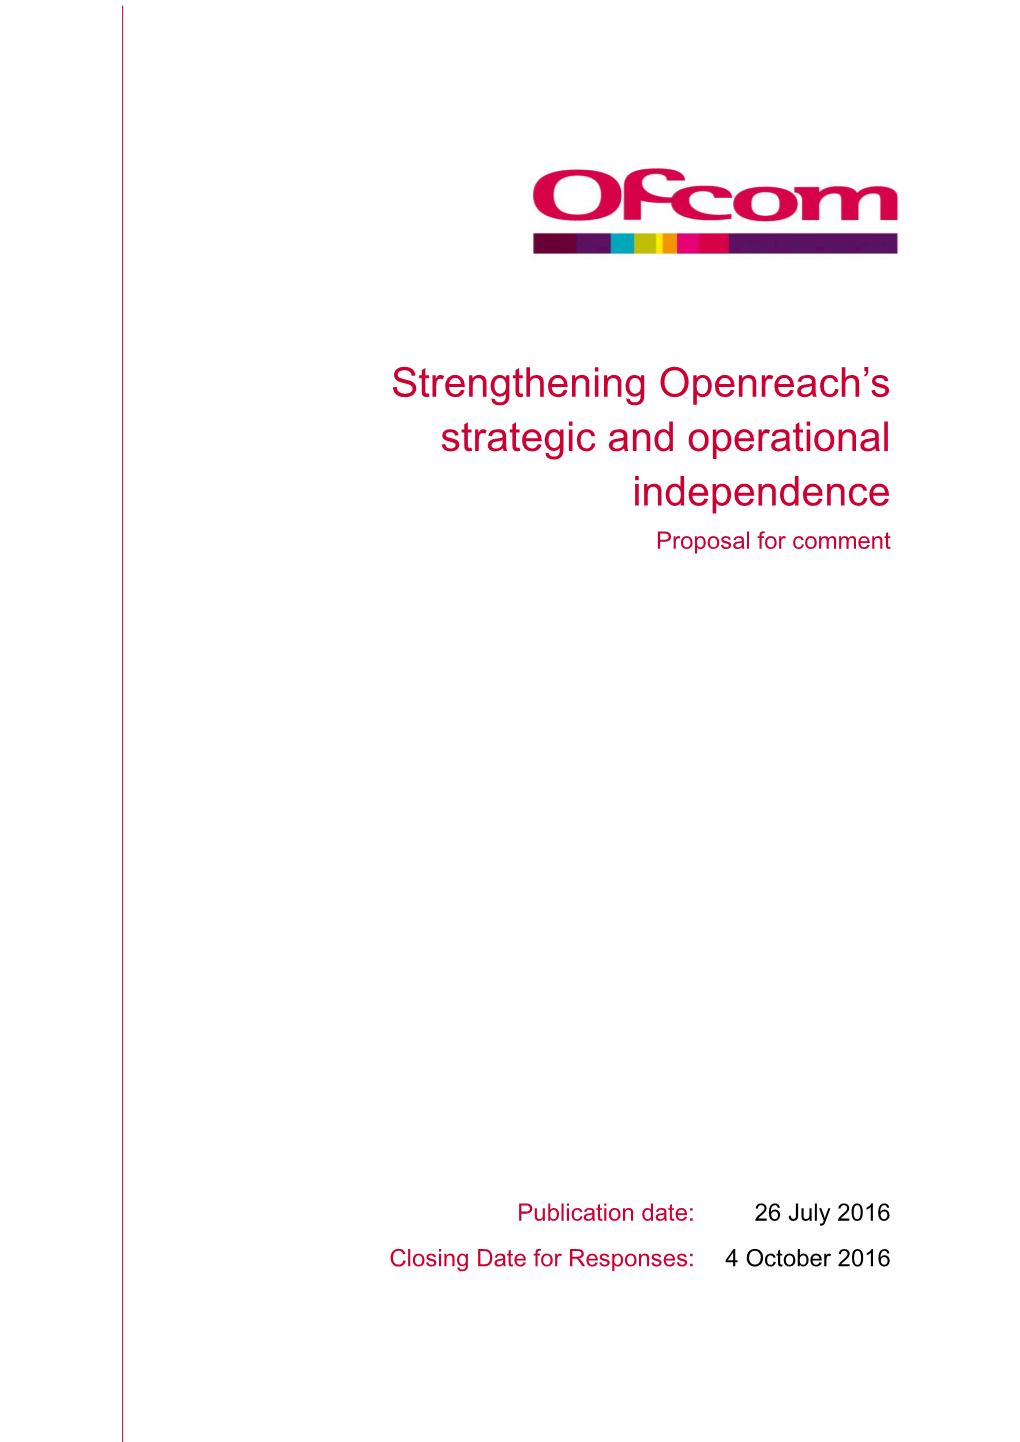 Strengthening Openreach's Strategic and Operational Independence